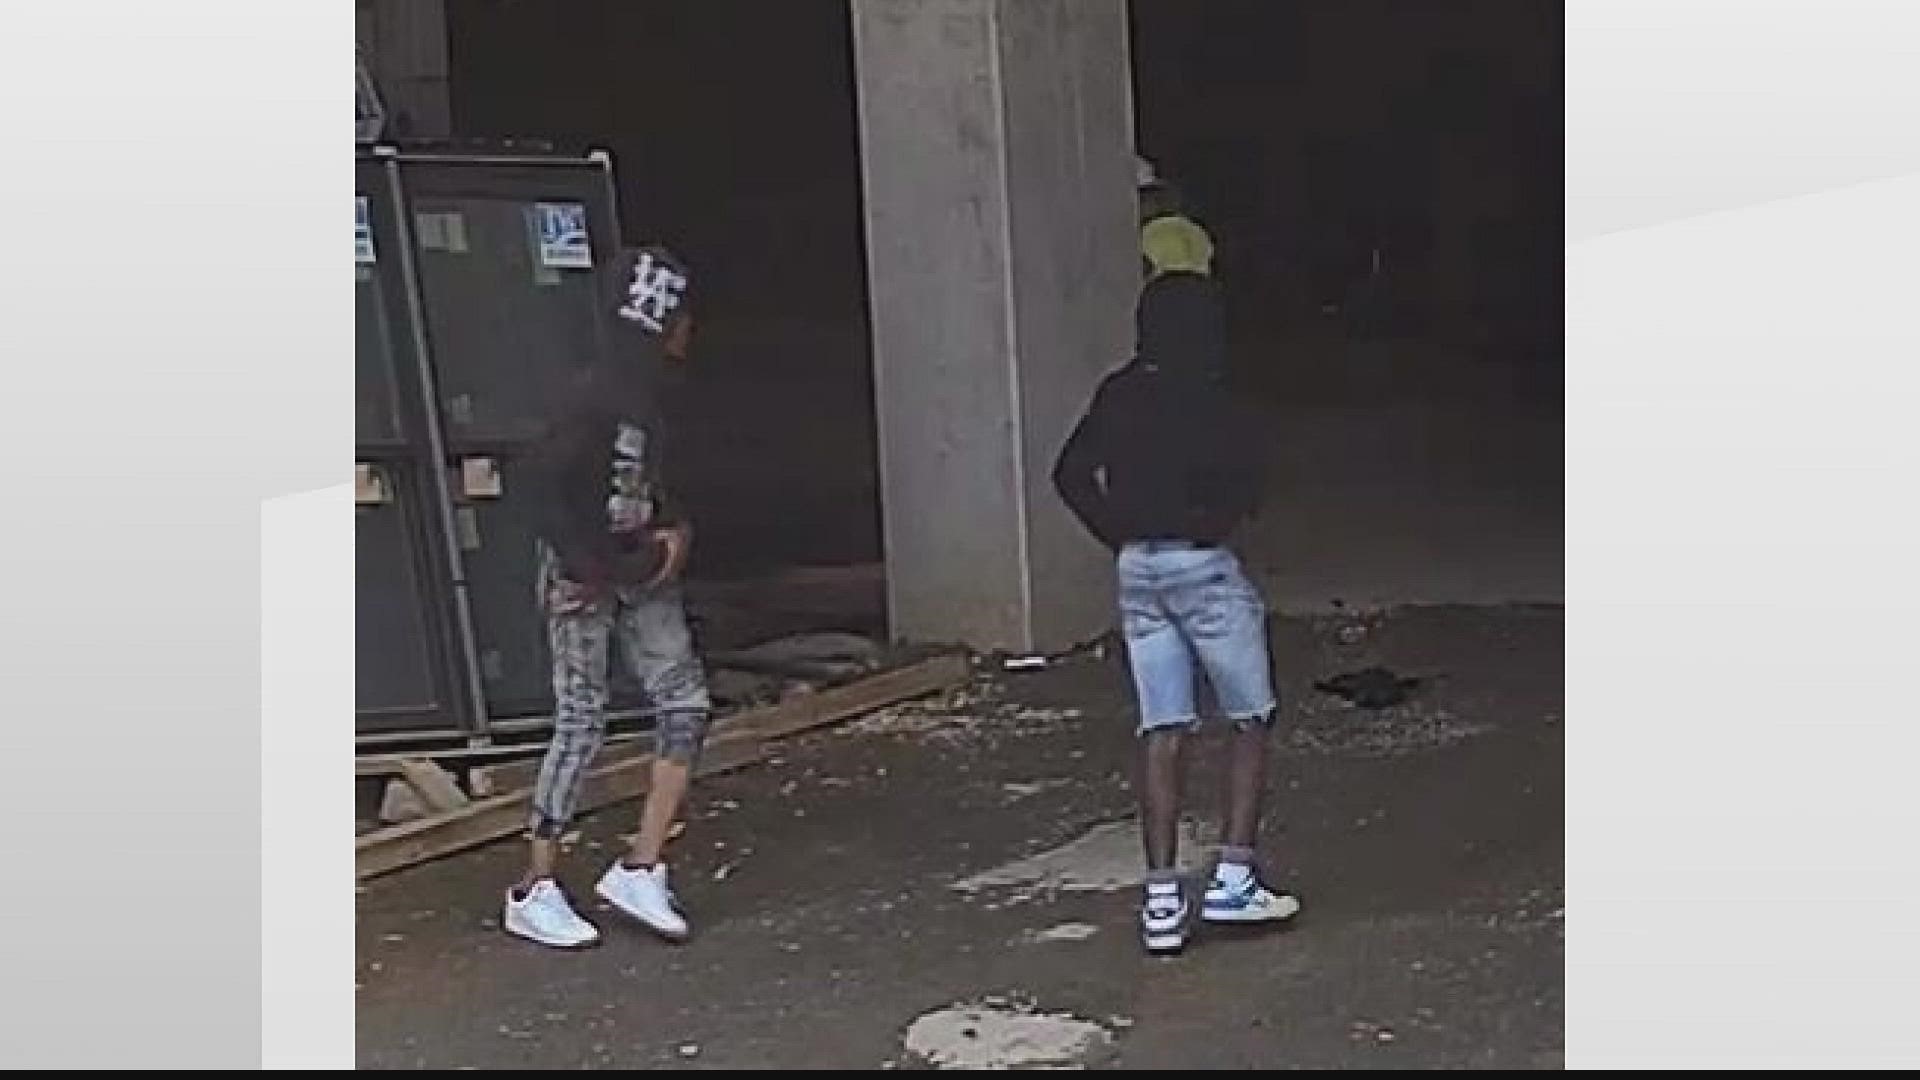 The two were caught on surveillance footage at a construction site on Anderson Street.